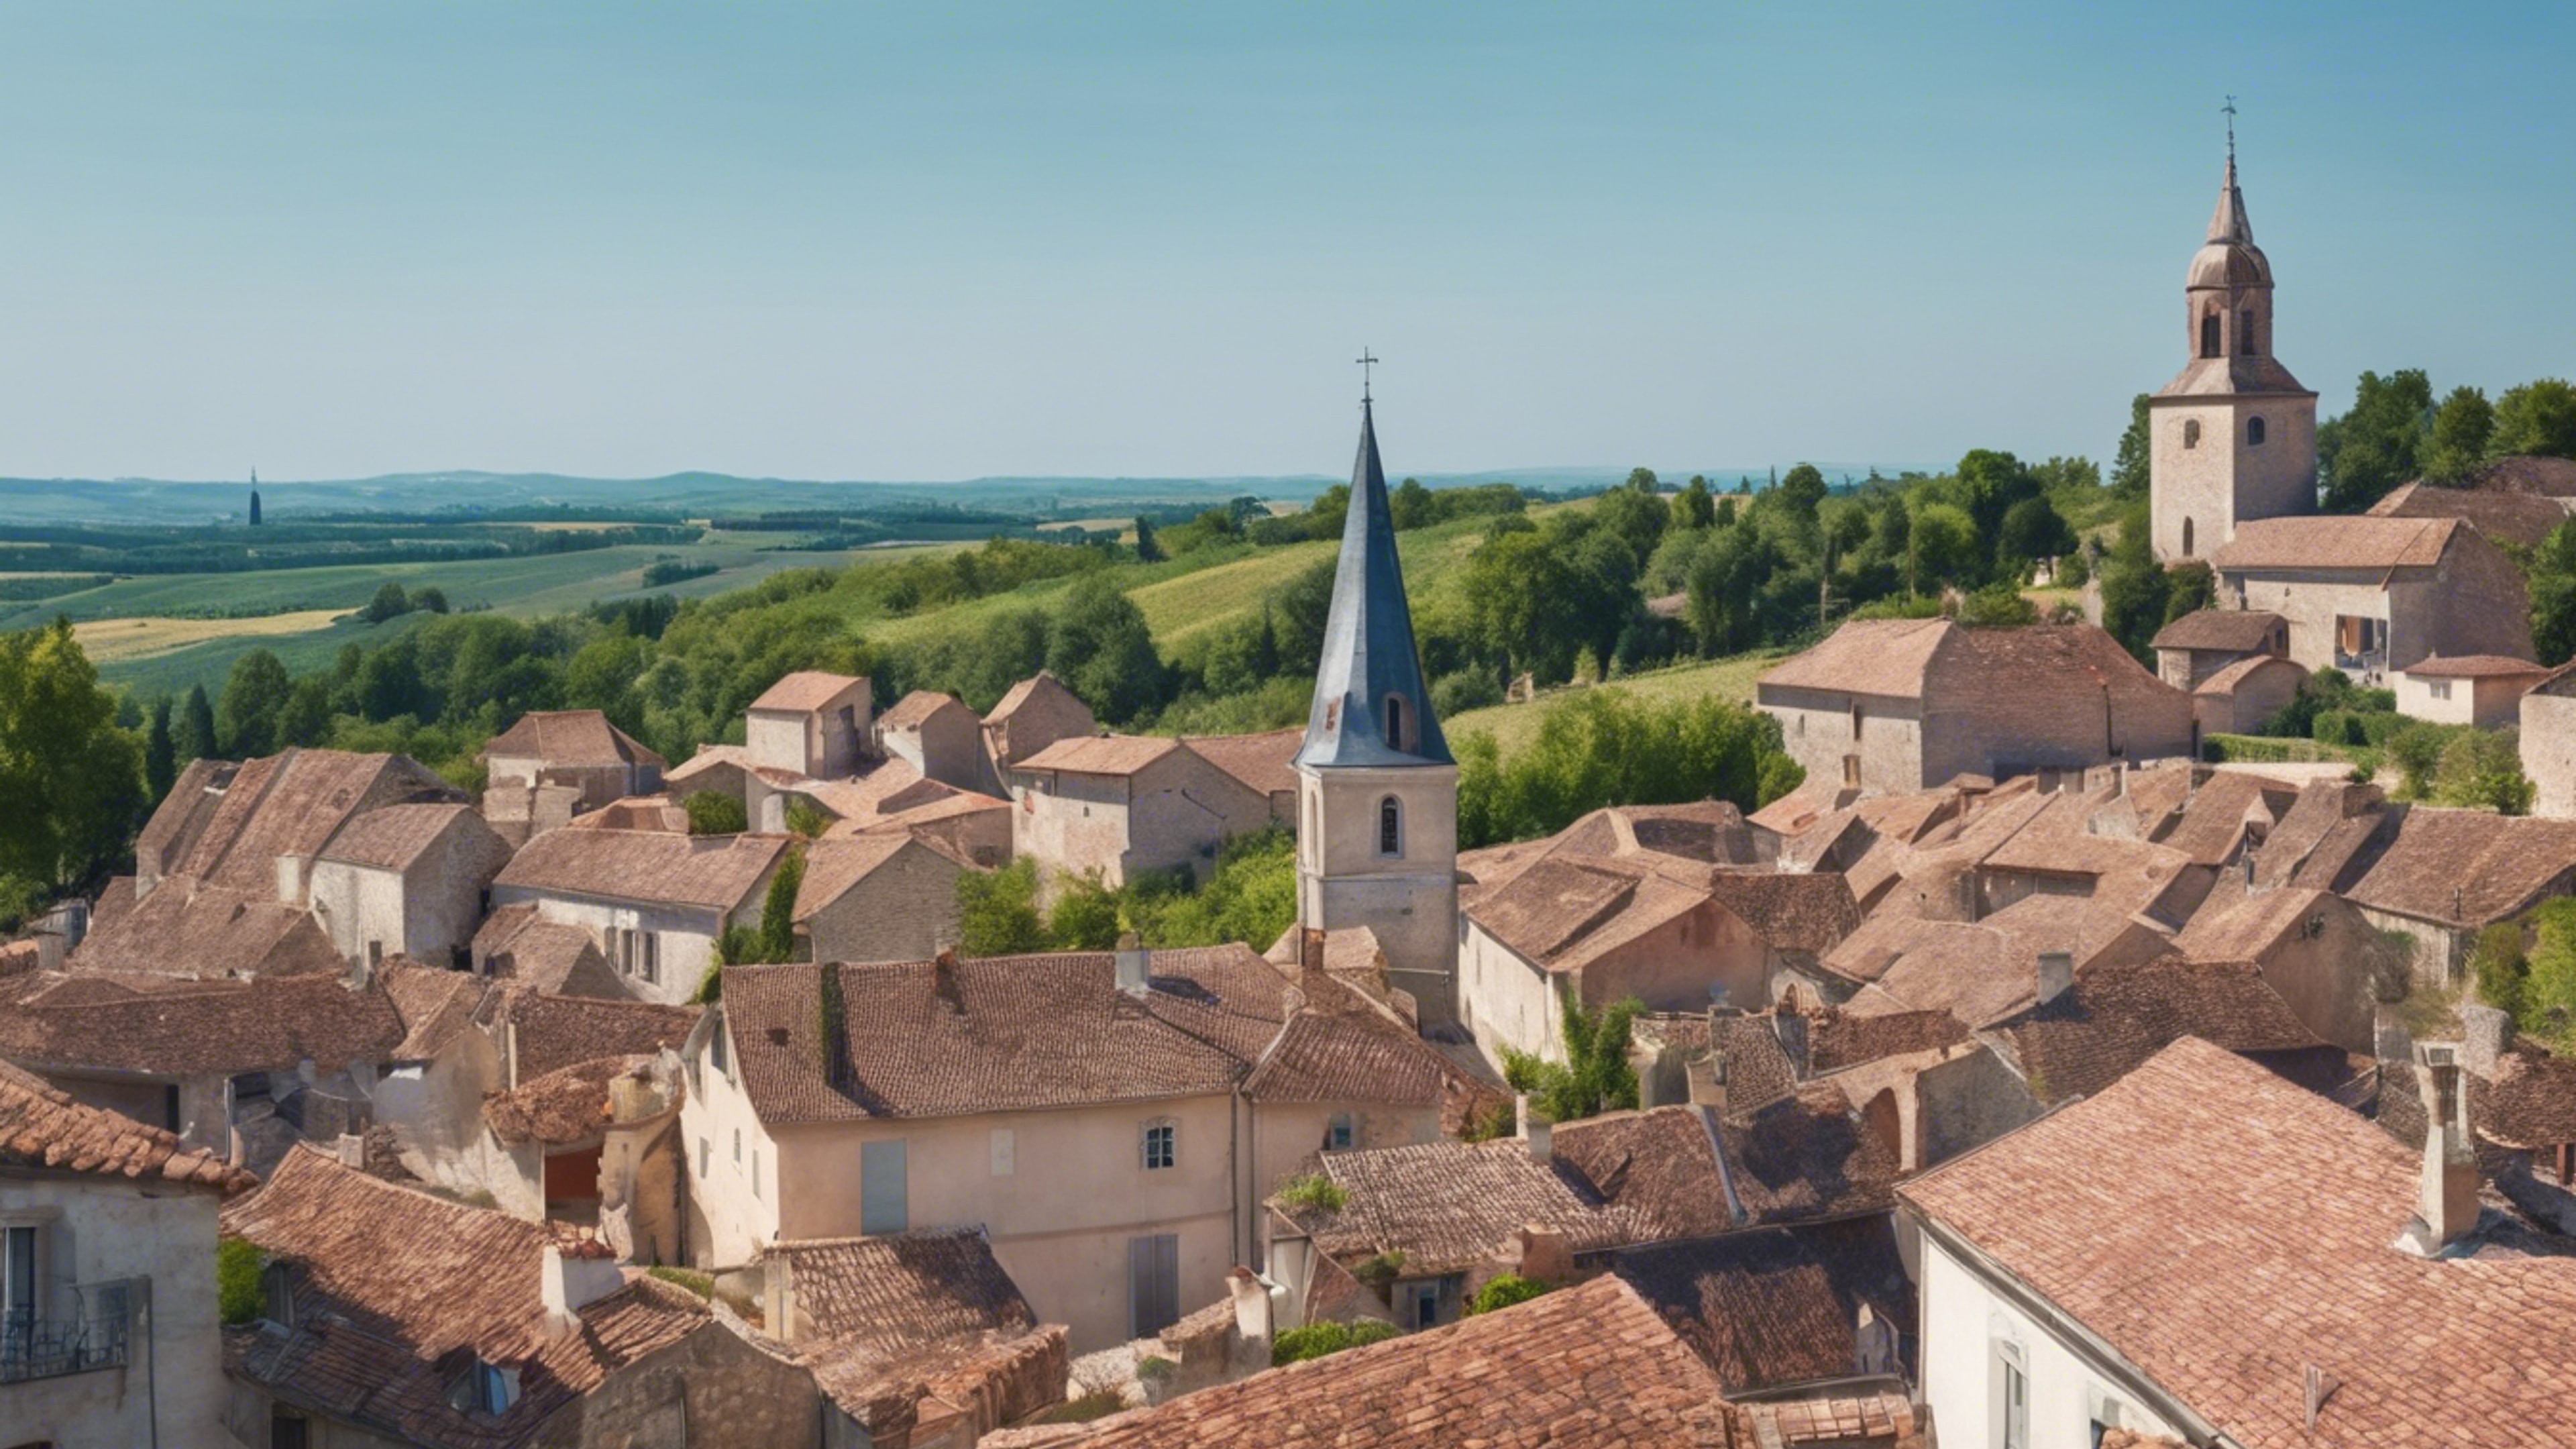 A panoramic view of a French country village with red-tiled roofs, a church spire, and surrounding vineyards under a clear blue sky.壁紙[29c4a00e876546cab0f2]